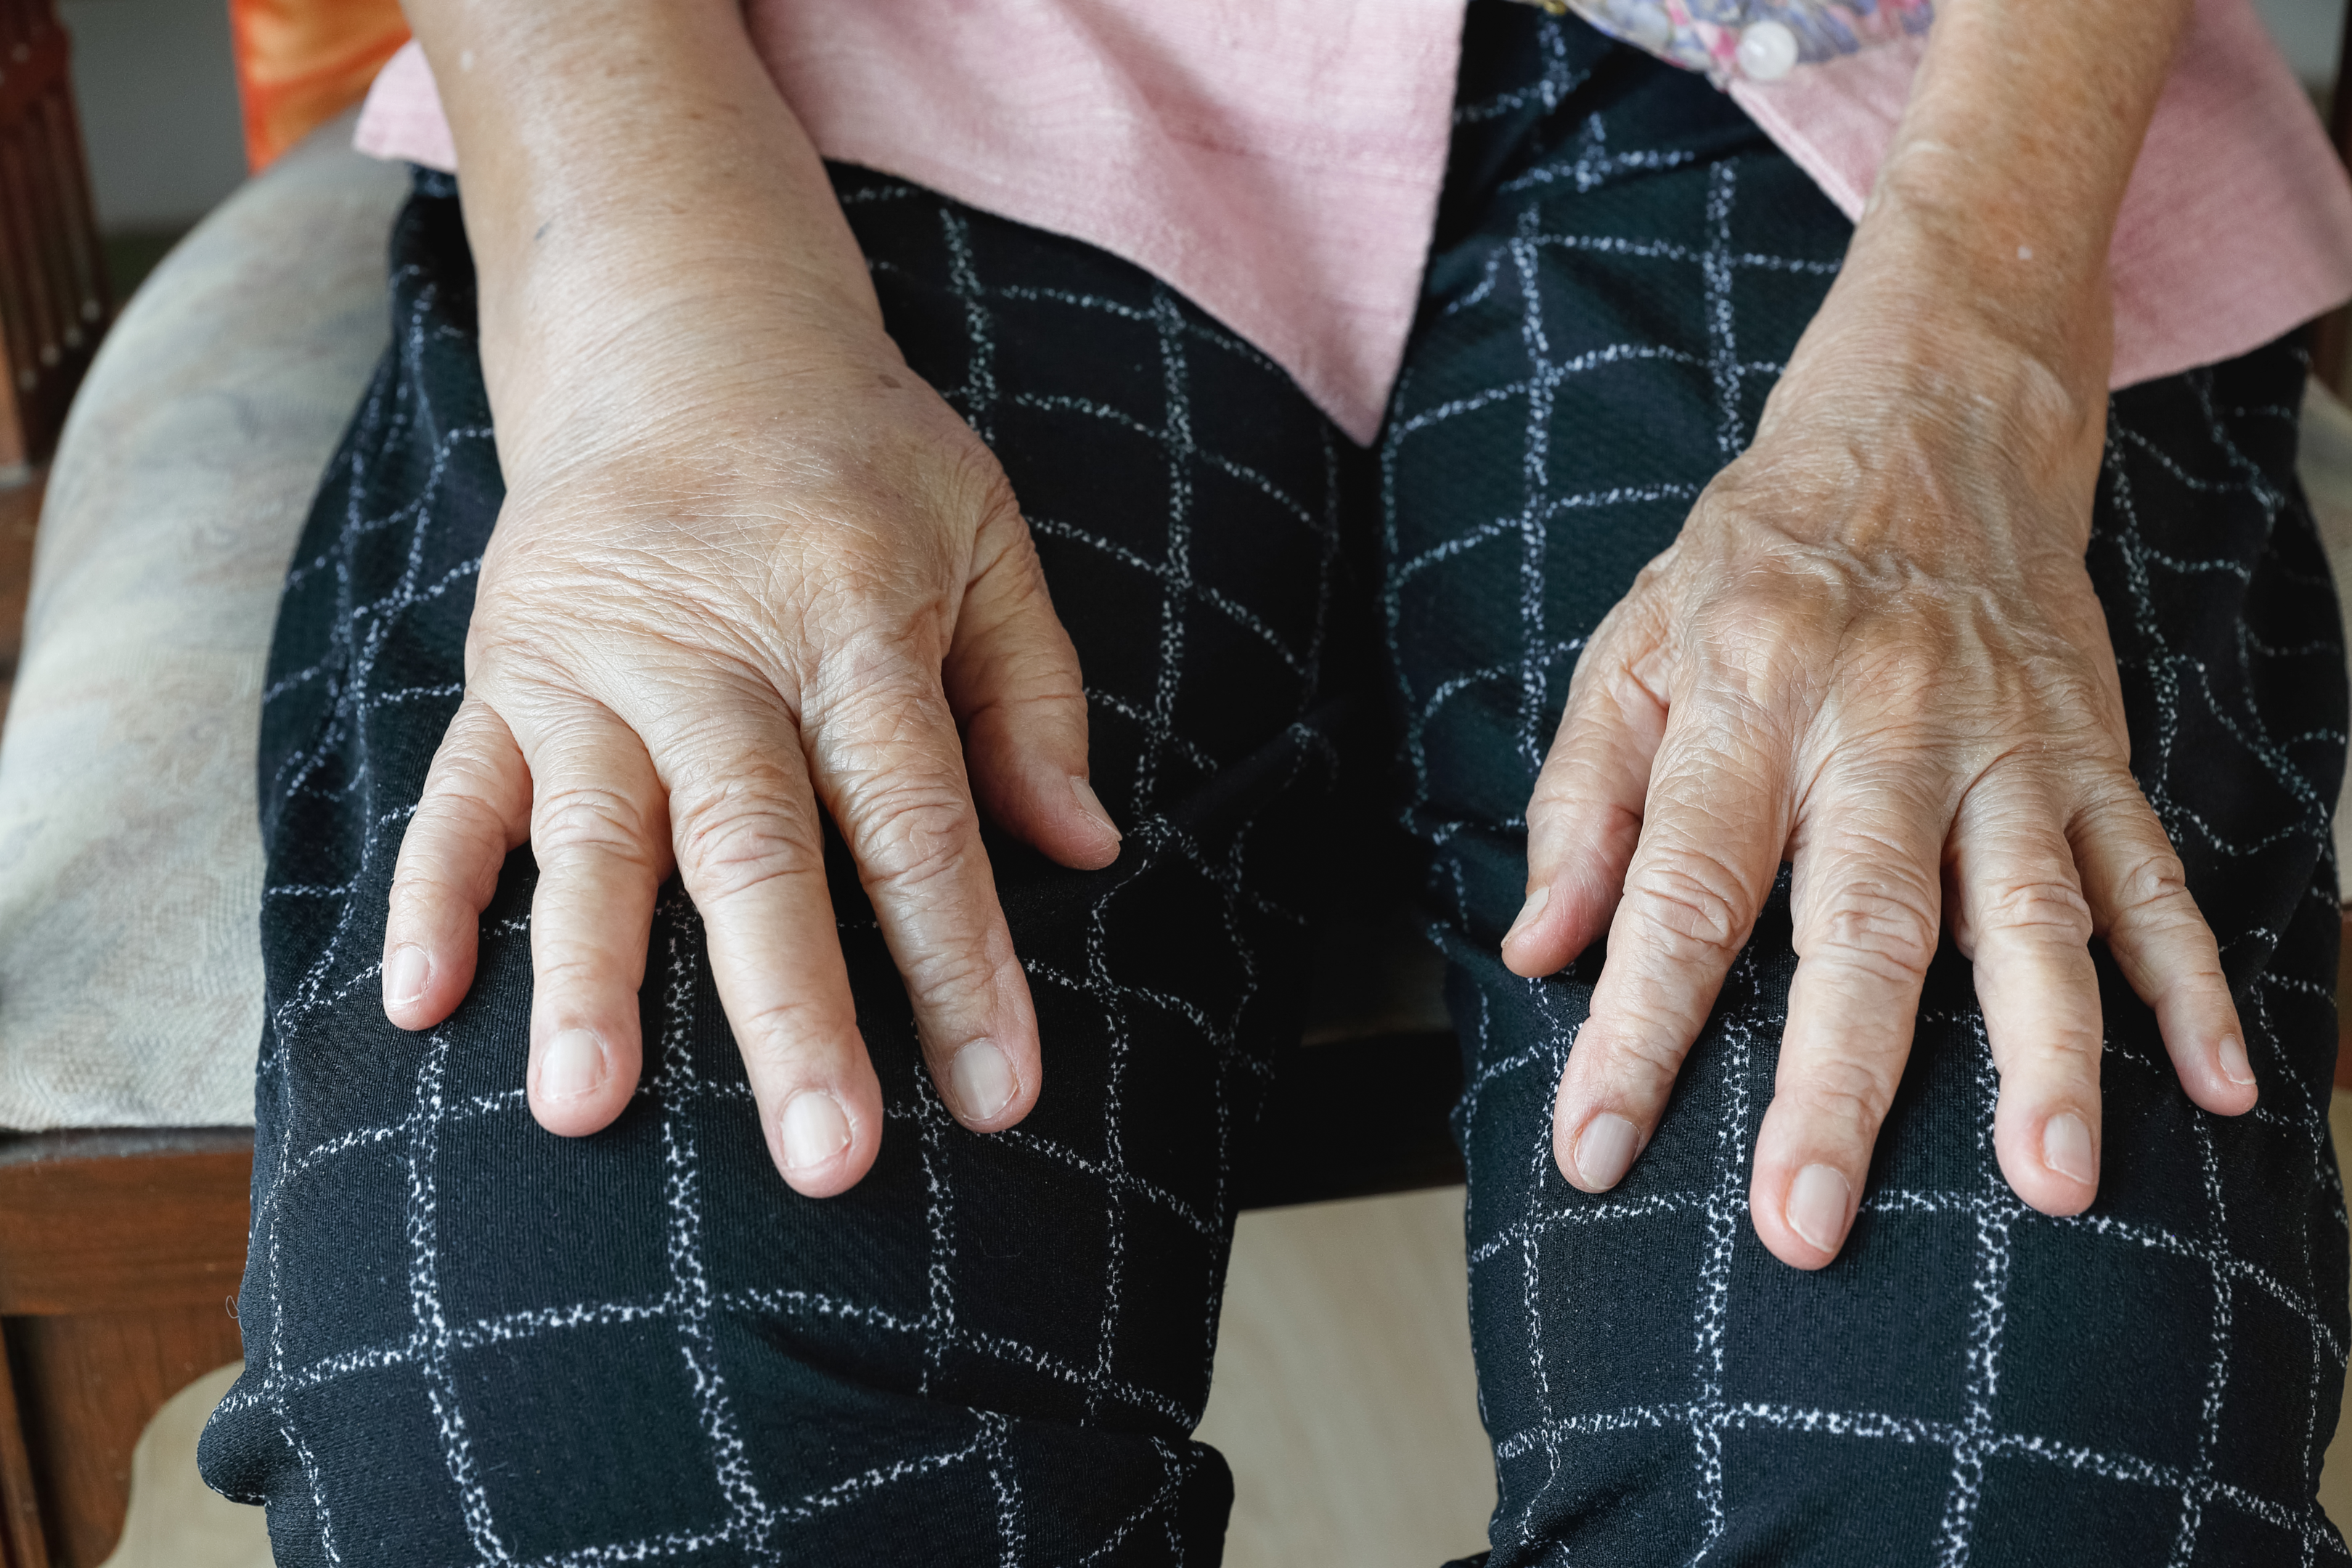 Swollen hands (non-painful) reflect thyroid abnormalities.